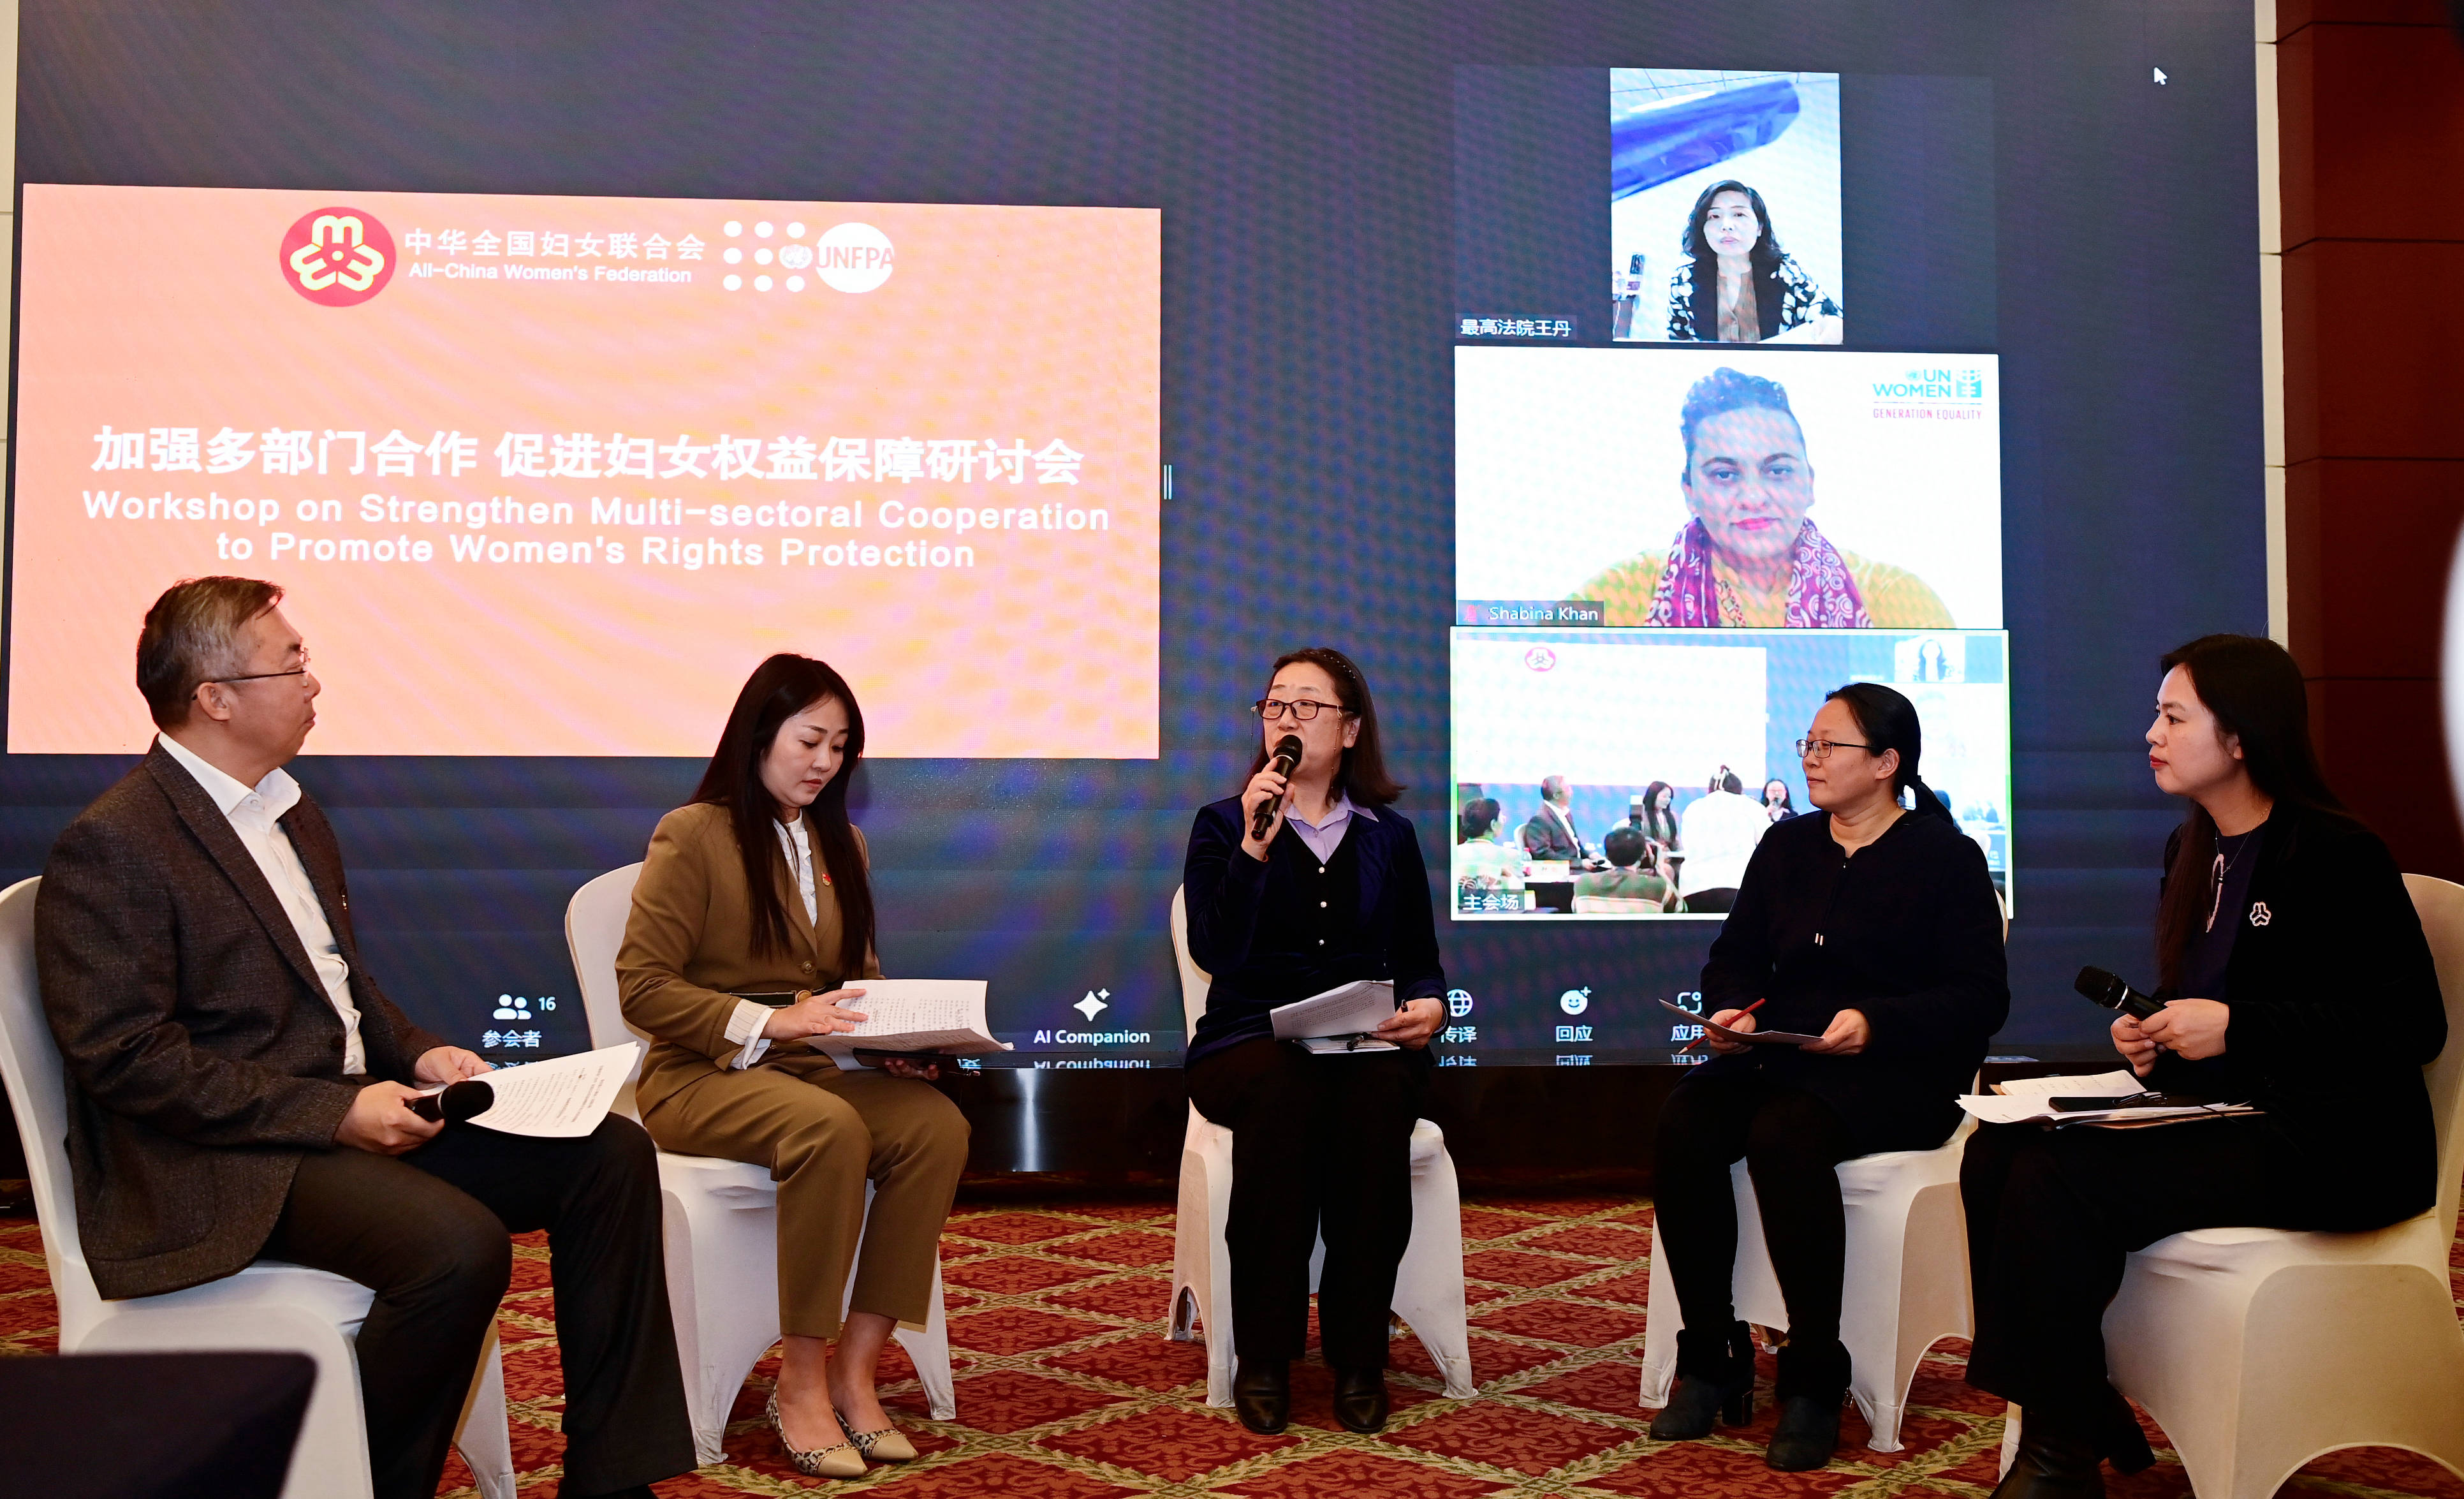 Workshop on Strengthening Multi-Sector Cooperation to Promote Women's Rights Protection Held in Beijing